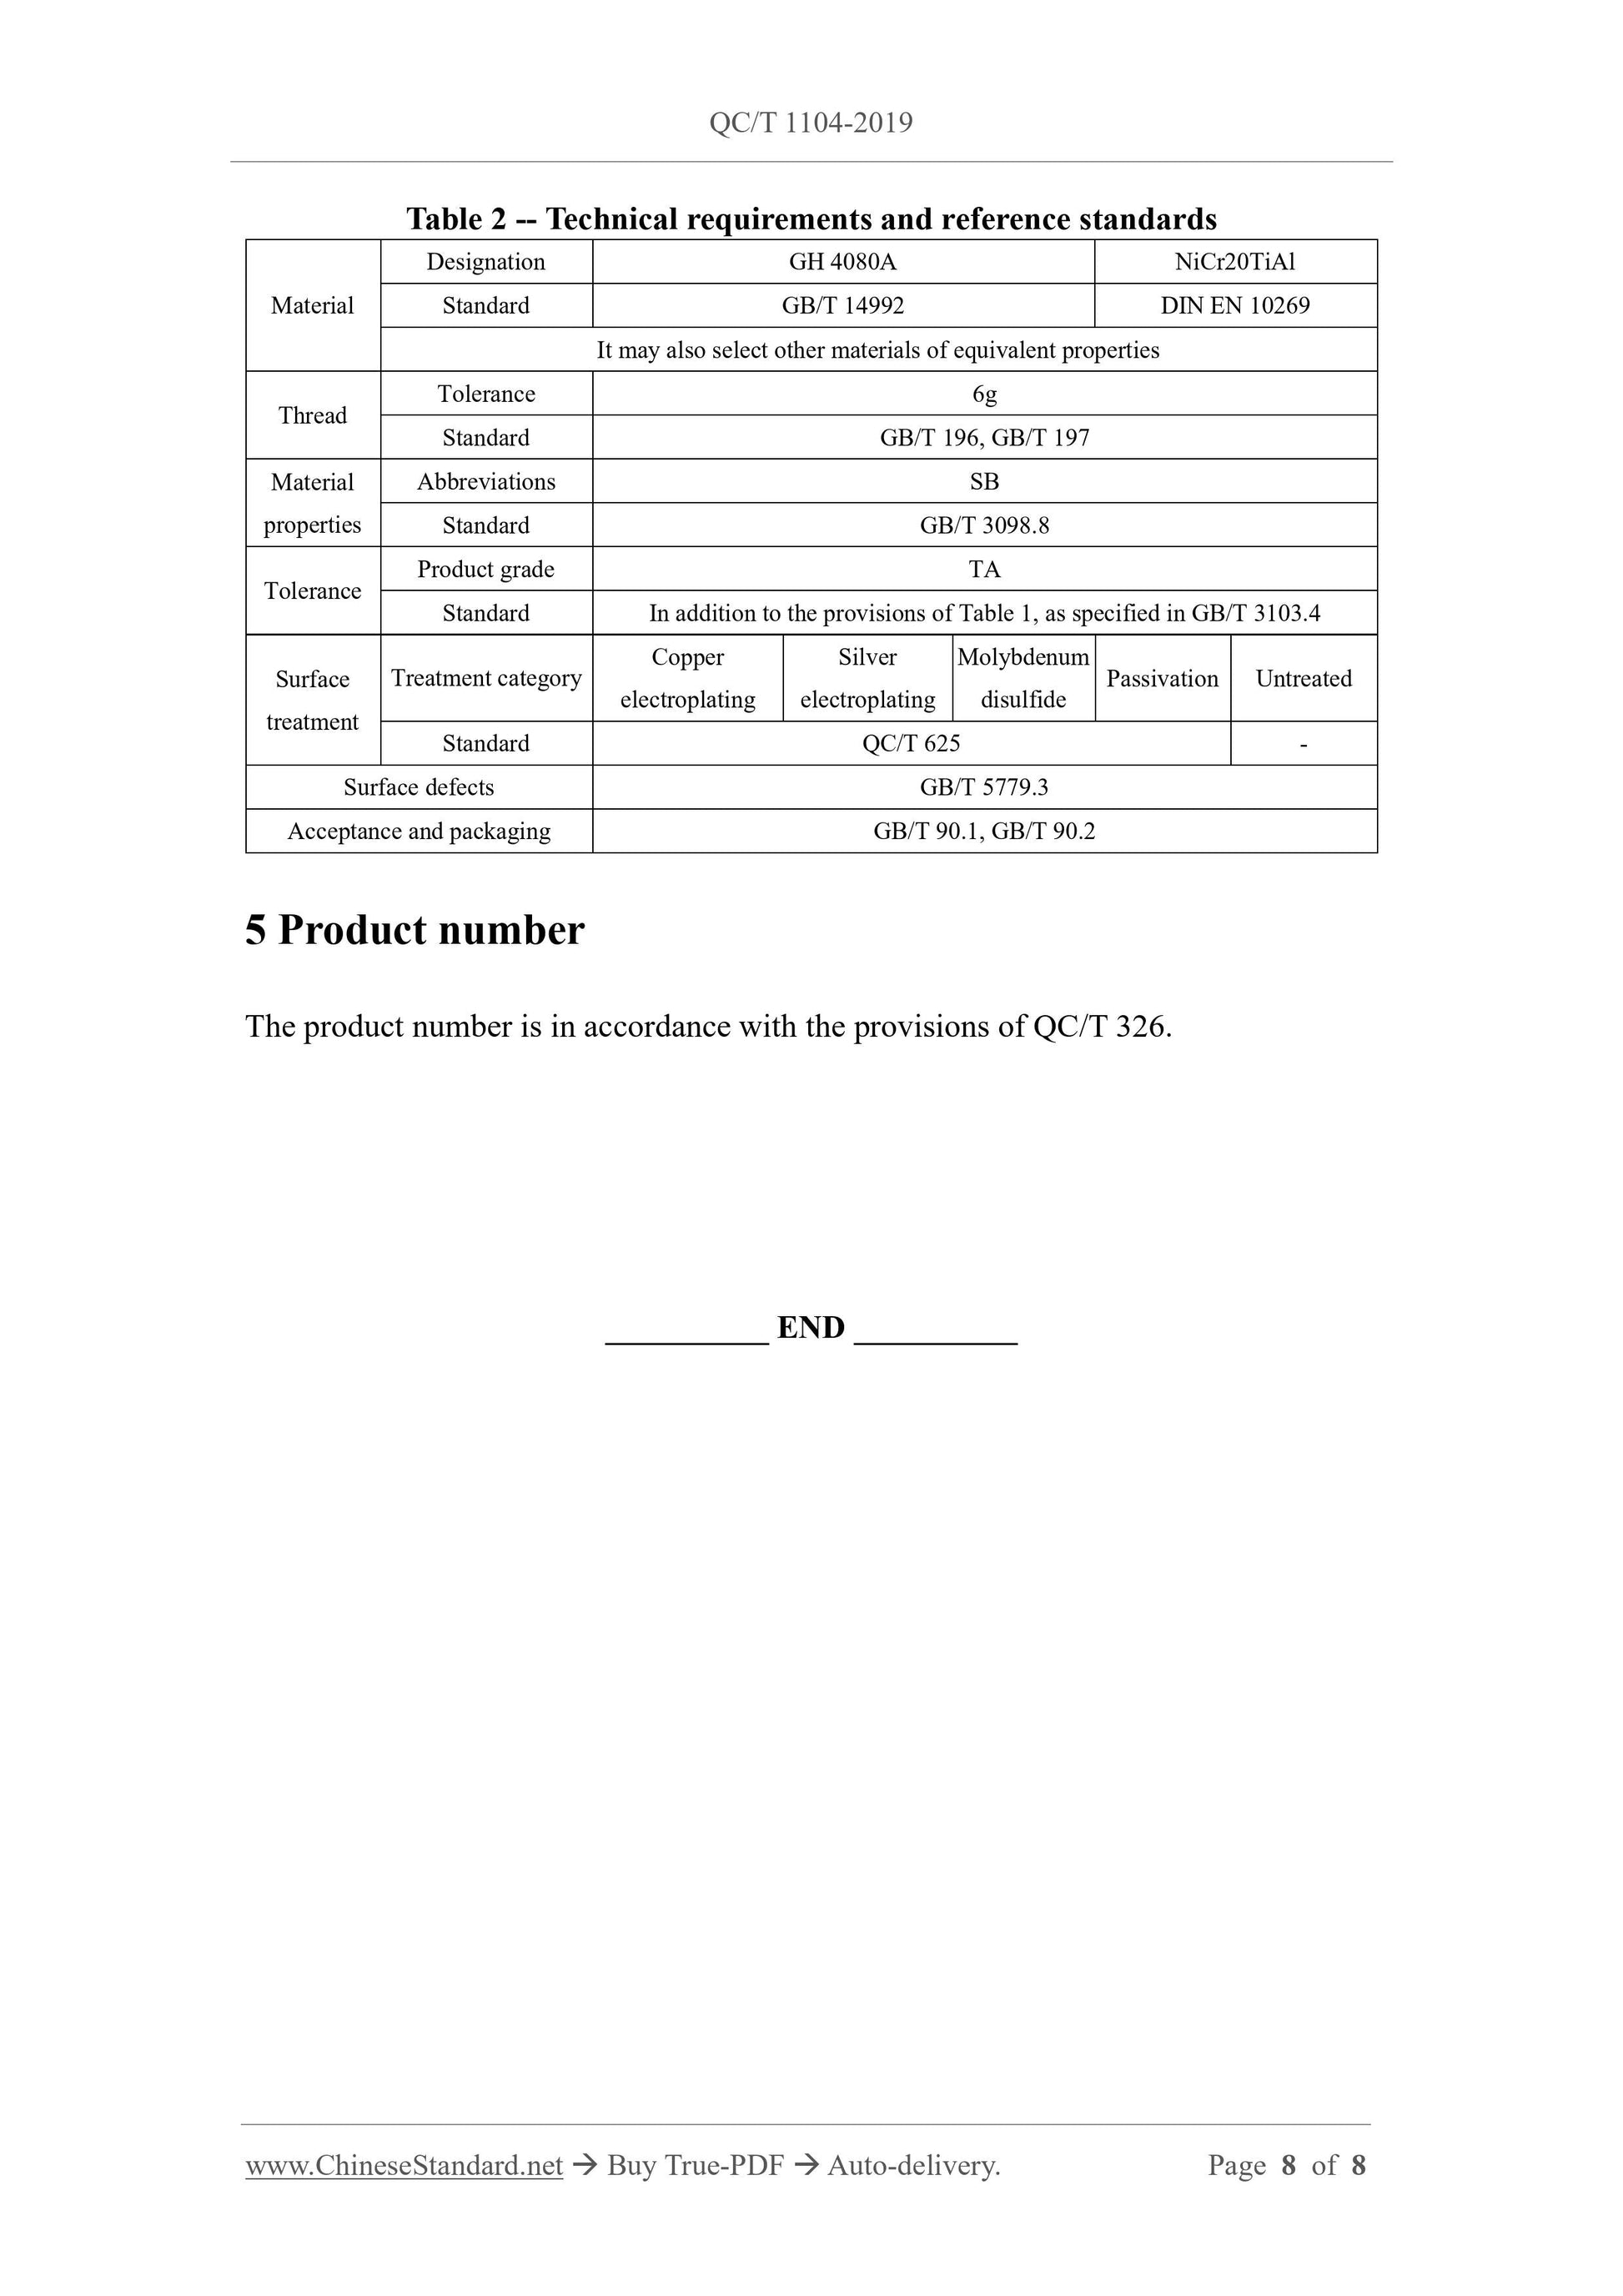 QC/T 1104-2019 Page 8